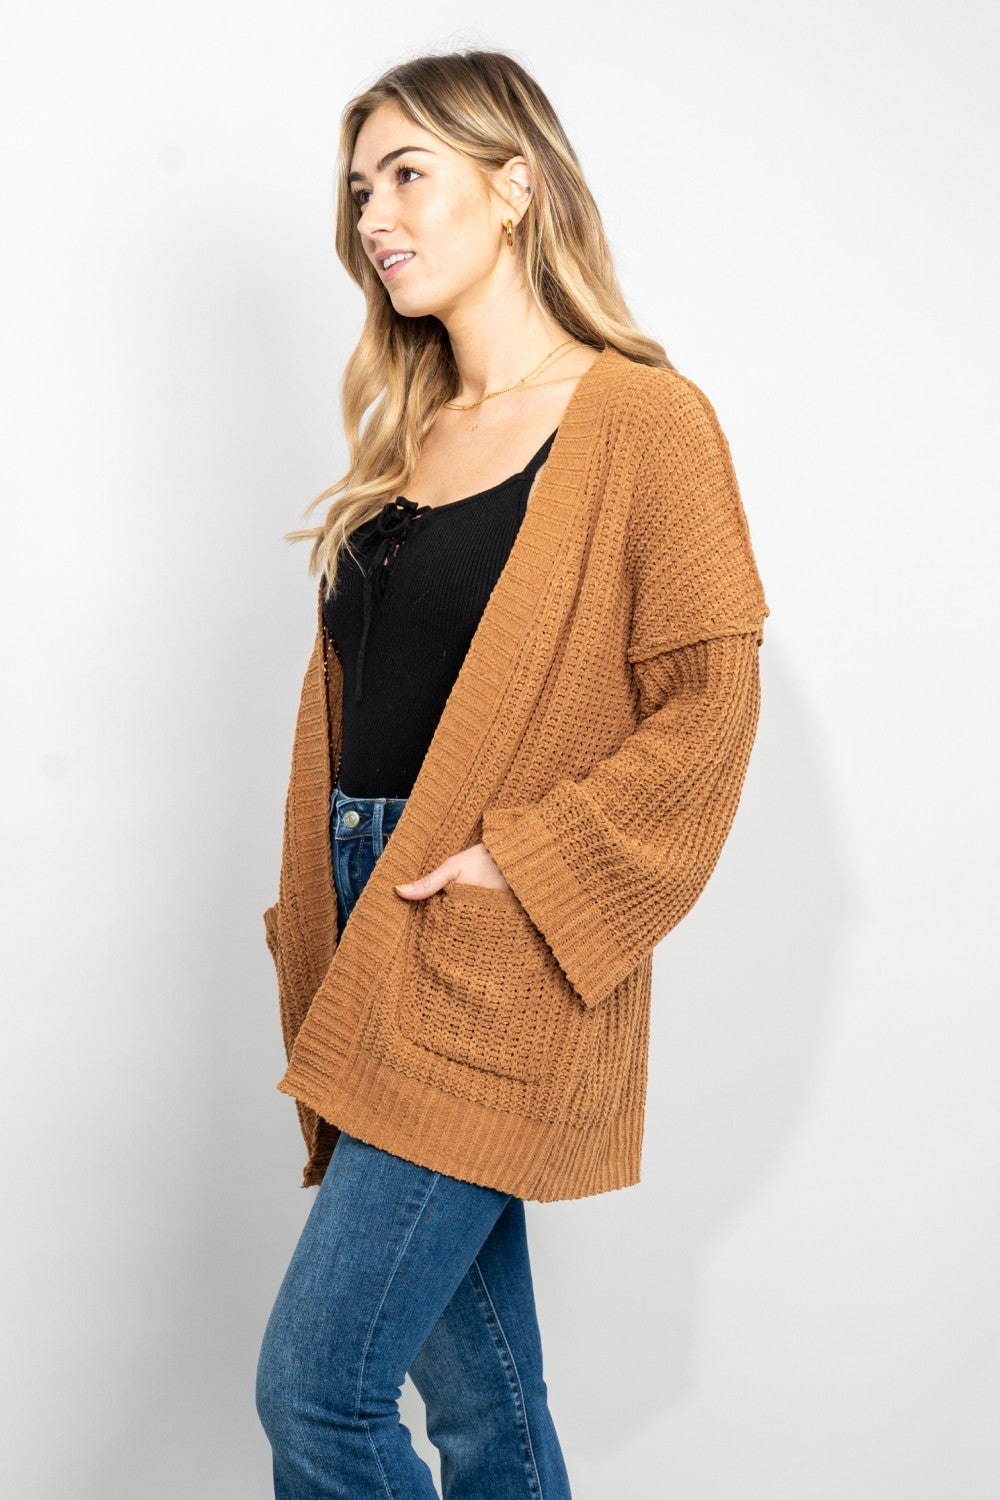 Trendsi Cupid Beauty Supplies woman cardigan Very J Exposed Seam Flare Sleeve Open Front Cardigan in Camel